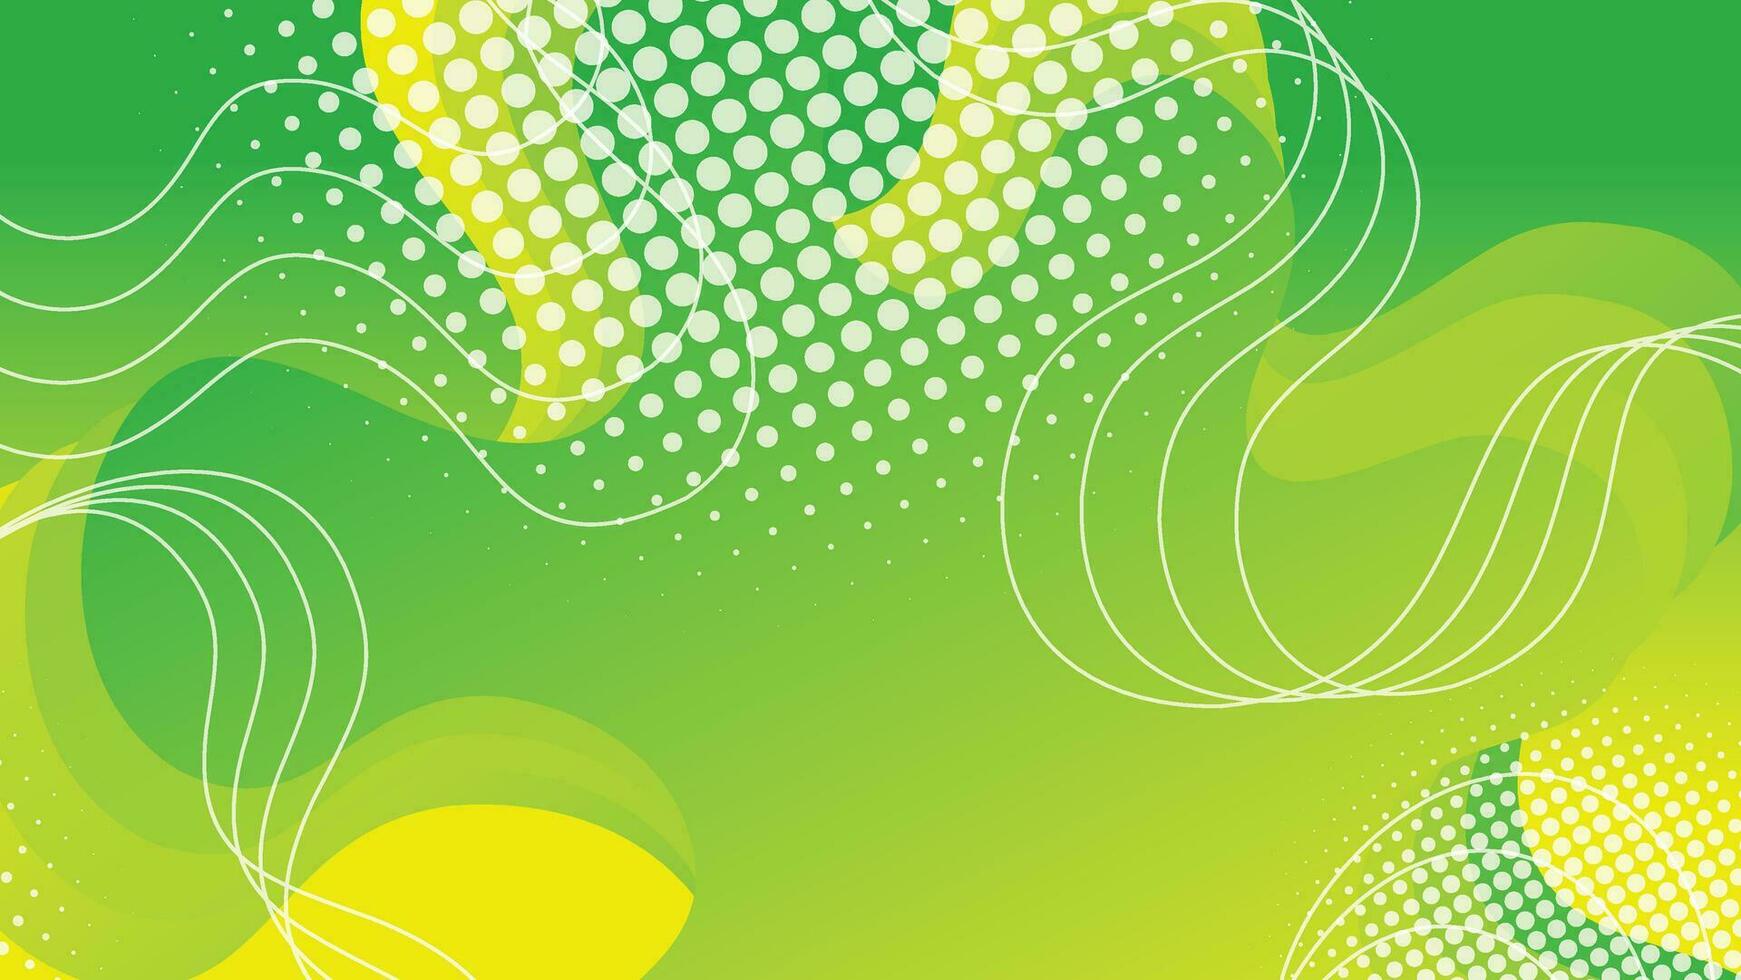 Abstract liquid wave background with green color background vector